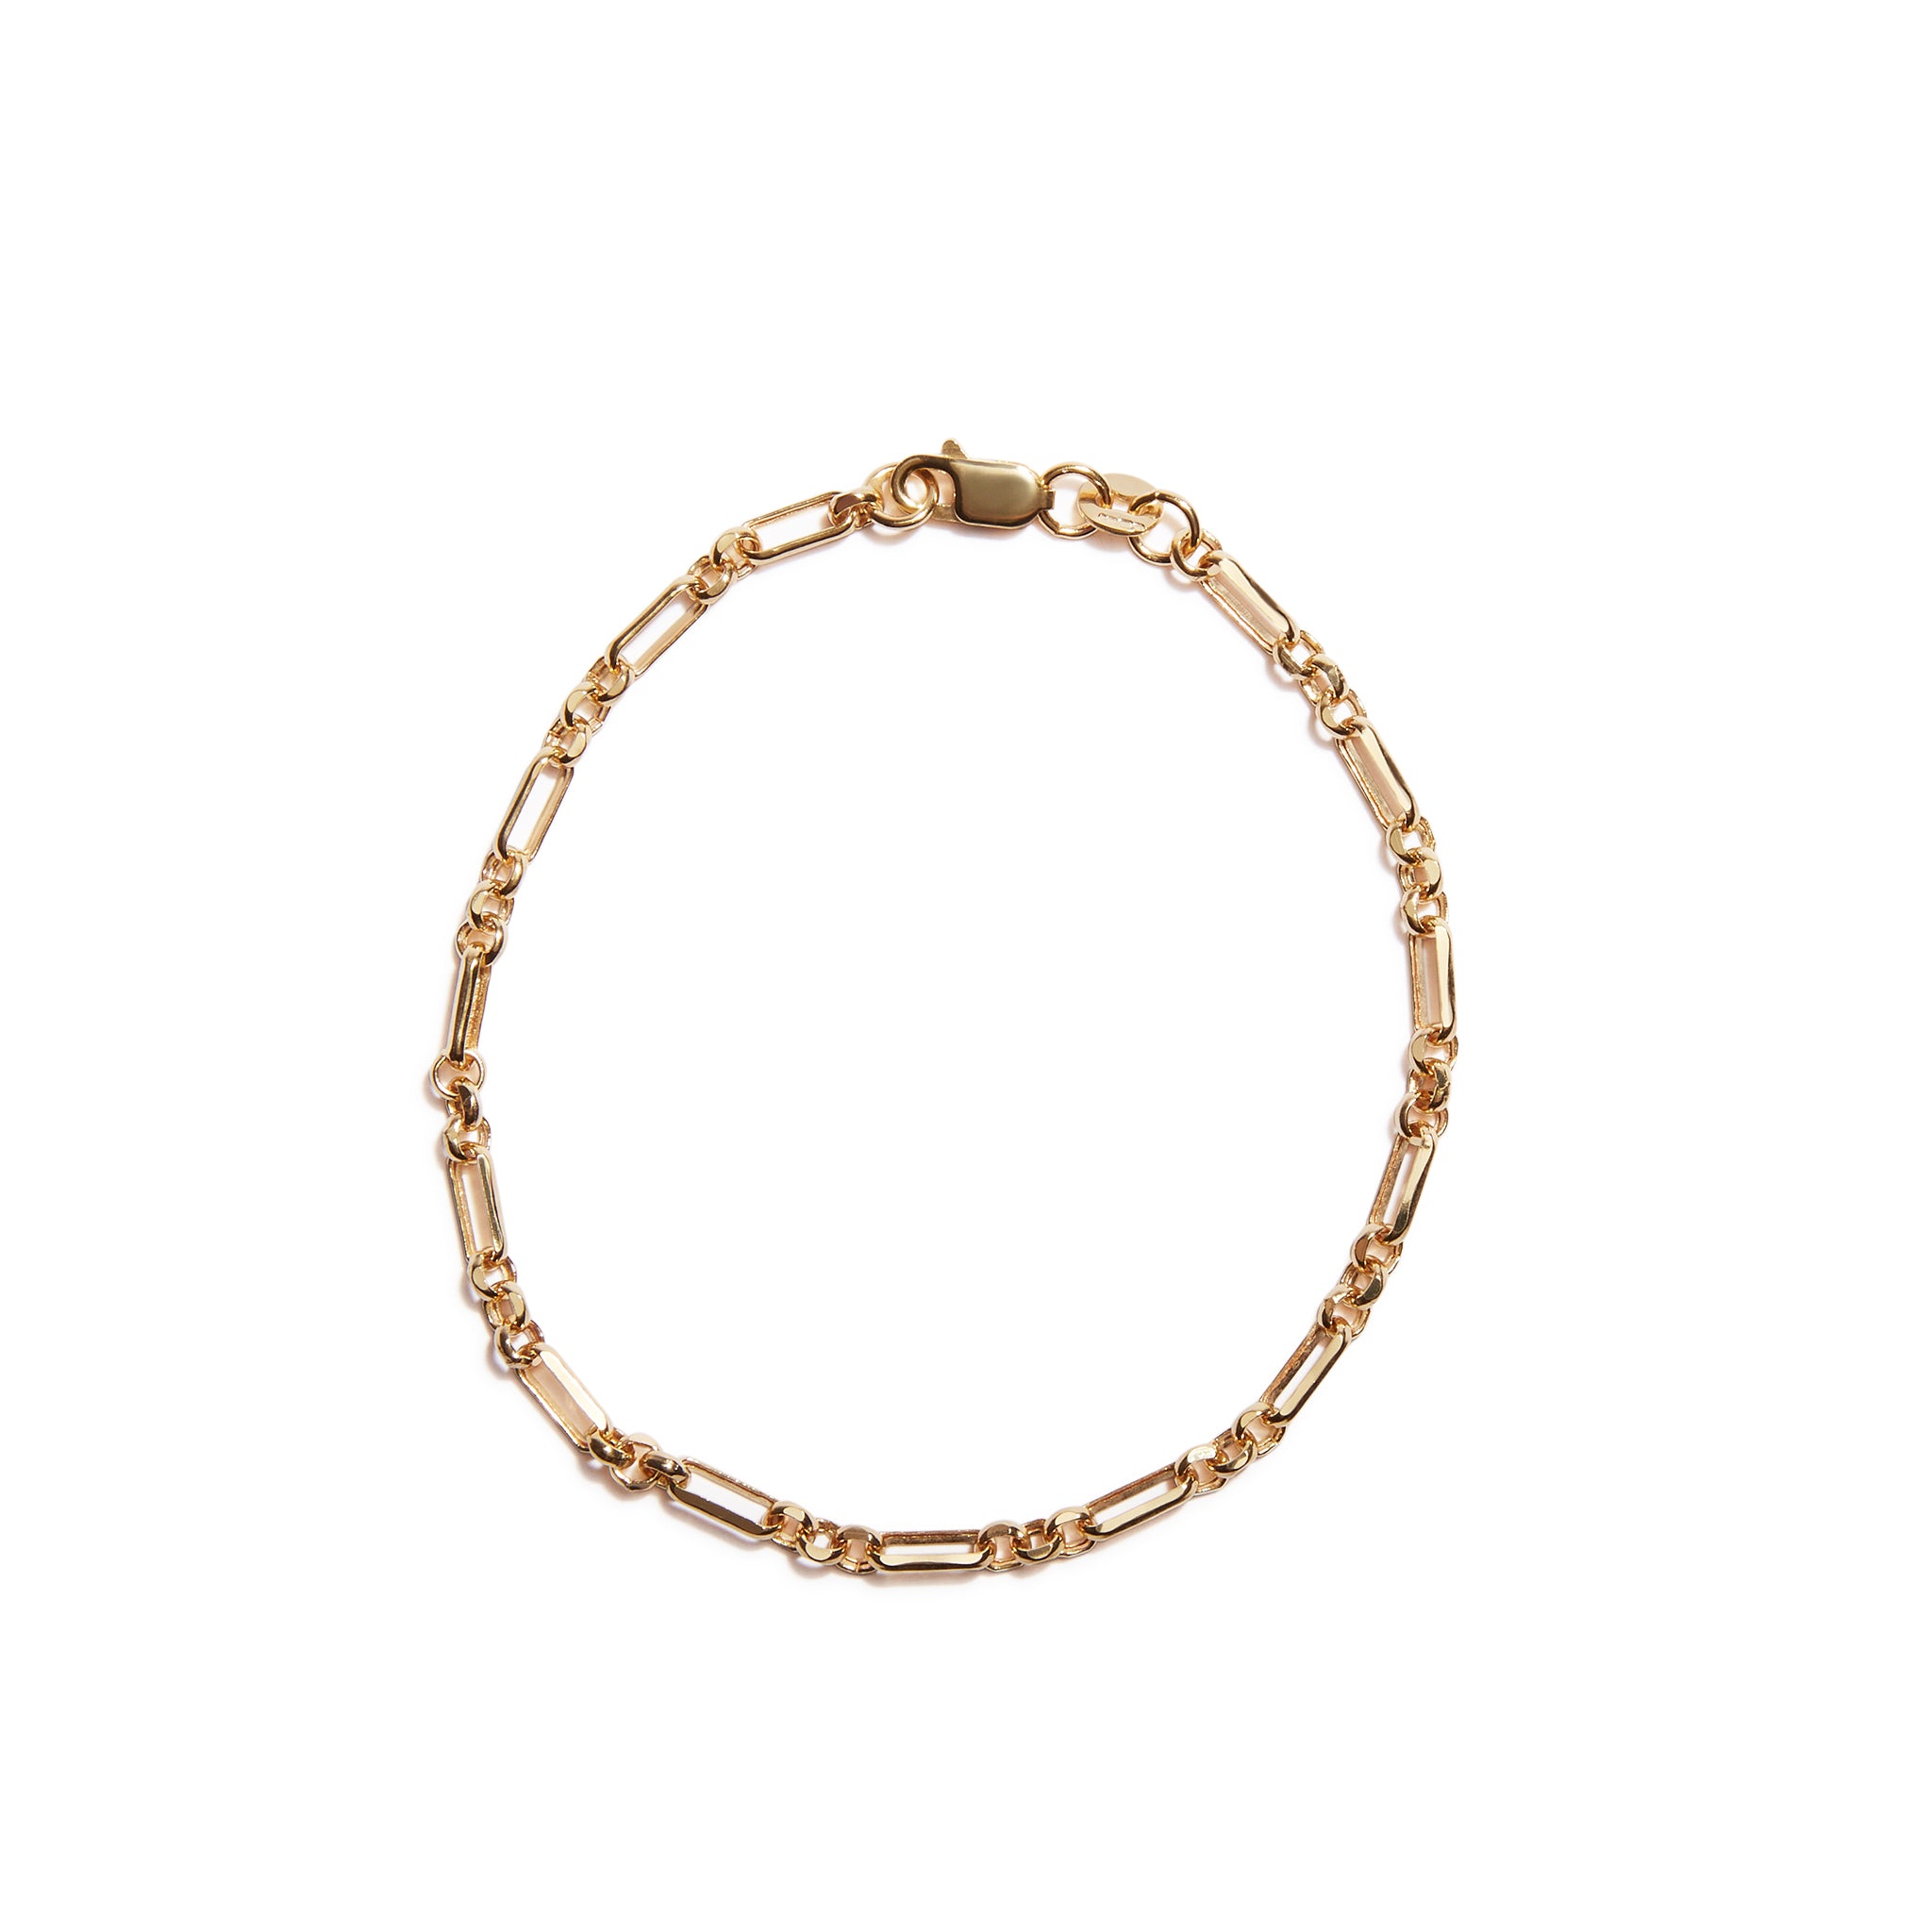 9ct Gold Figaro Twist Bracelet  75in  G7402  FHinds Jewellers